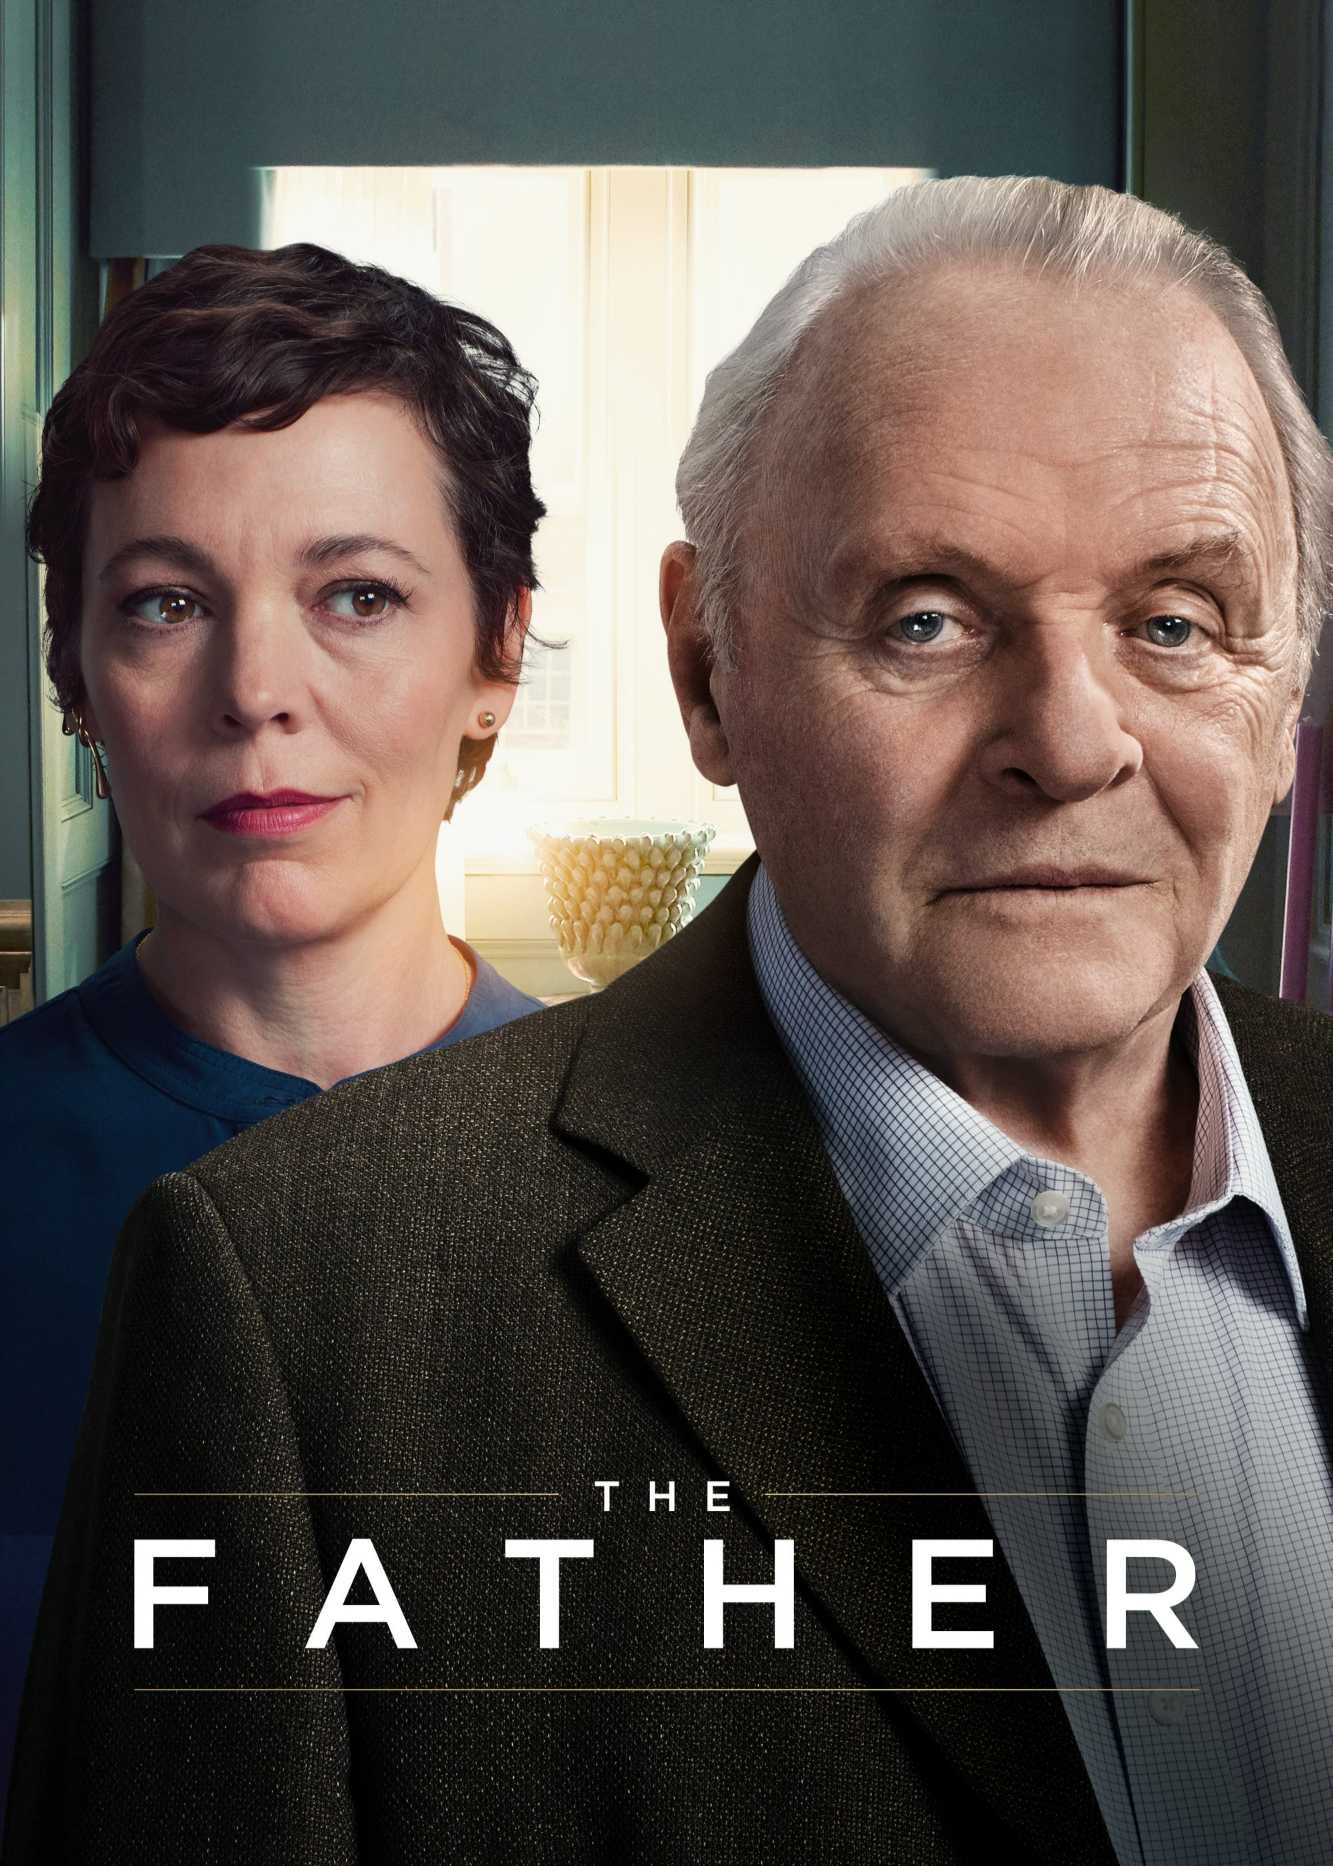 The father - The father